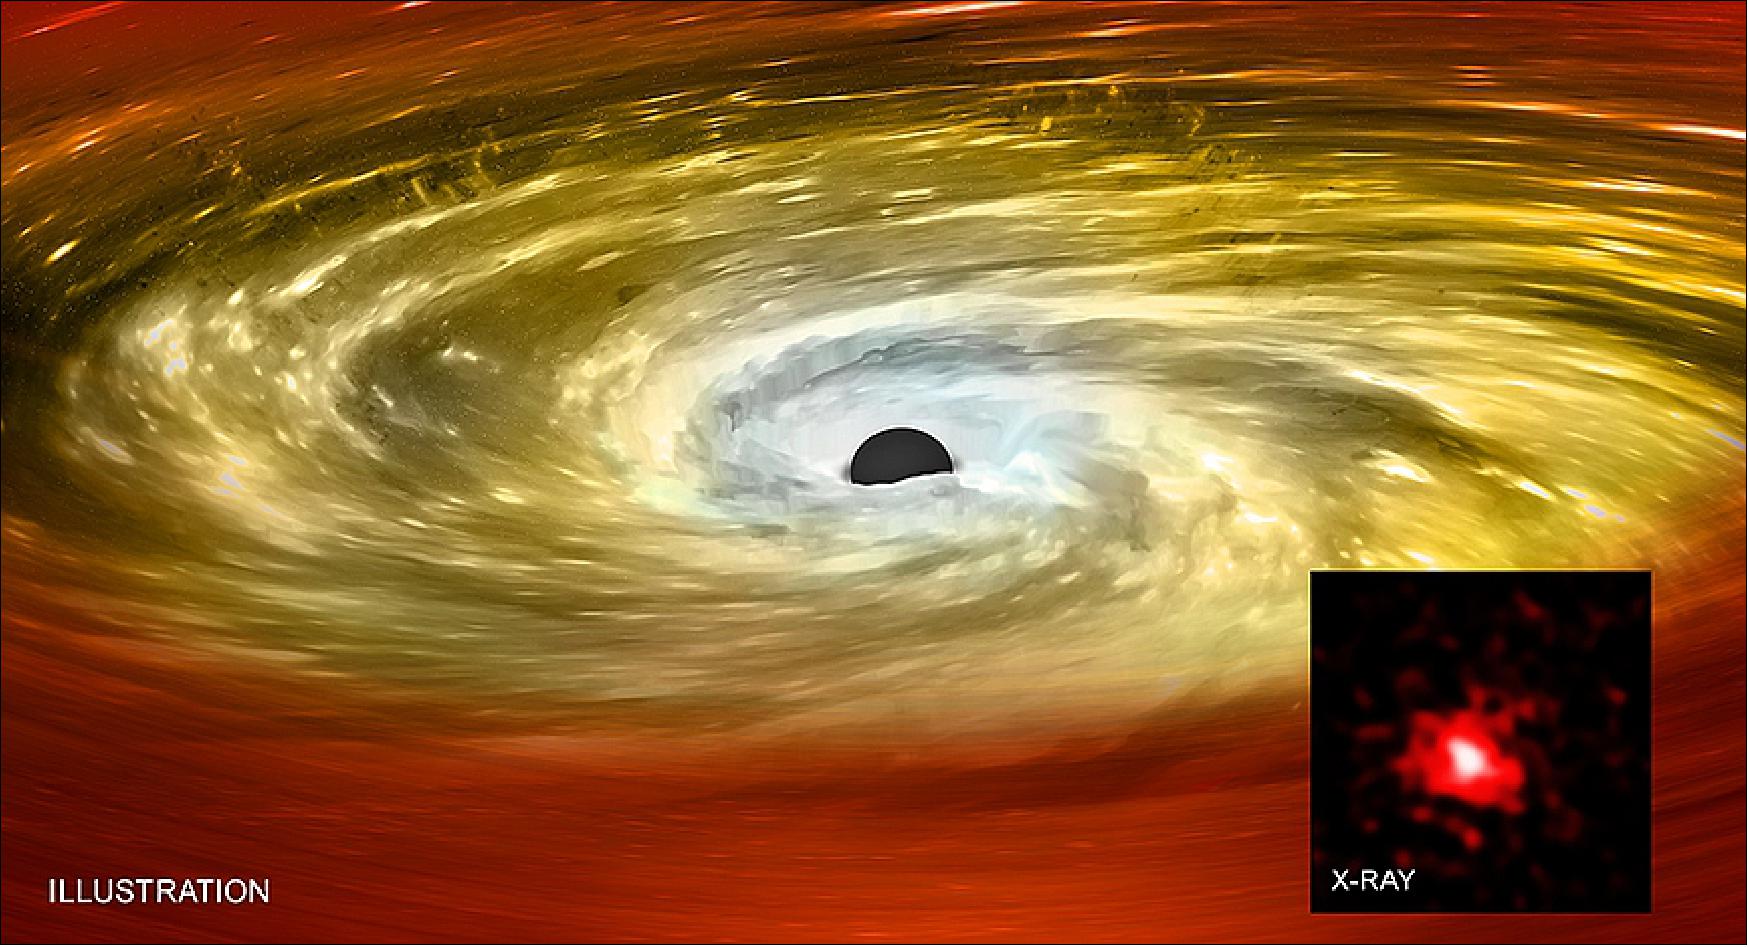 Figure 48: An artist's illustration (main panel) shows how material falling towards black holes can be redirected outward at high speeds due to intense gravitational and magnetic fields. These high-speed jets can tamp down the formation of stars. This happens because the blasts from the vicinity of the black hole provide a powerful source of heat, preventing the galaxy's hot interstellar gas from cooling enough to allow large numbers of stars to form (image credit: X-ray: NASA/CXC/MTA-Eötvös University/N. Werner et al.; Illustration: NASA/CXC/M.Weiss)